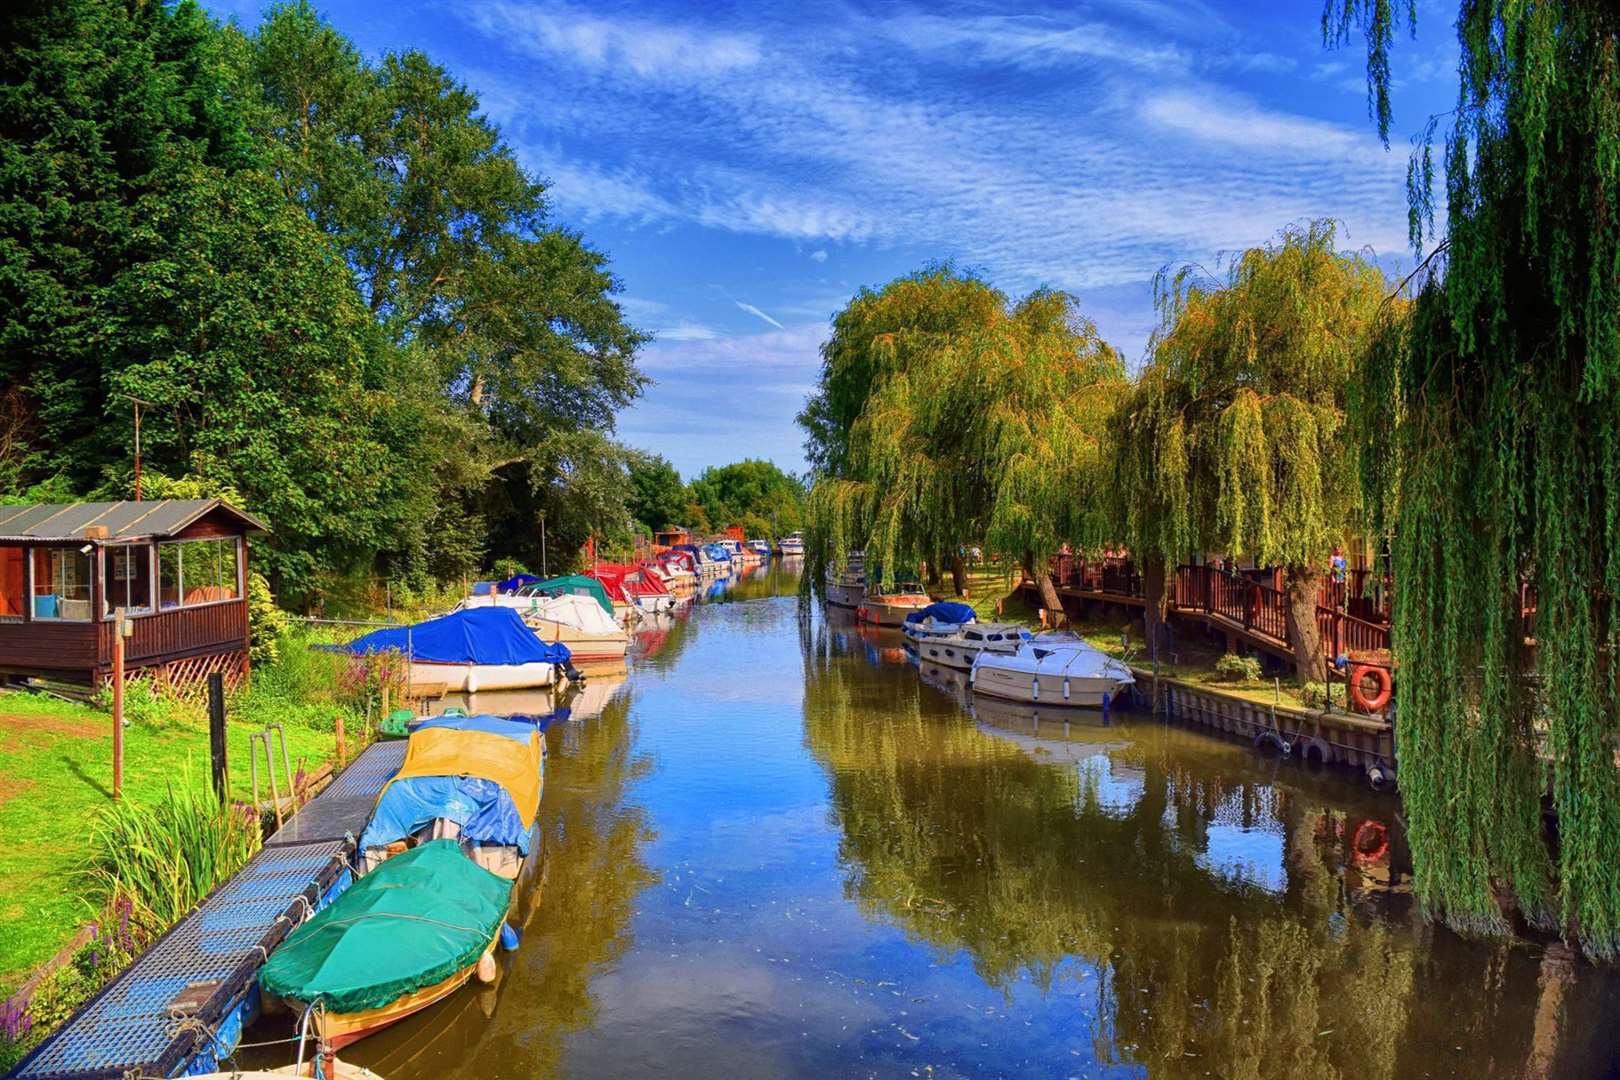 The River Stour at Grove Ferry is popular for canoe trips and pleasure boat rides Pic: John Hippisley